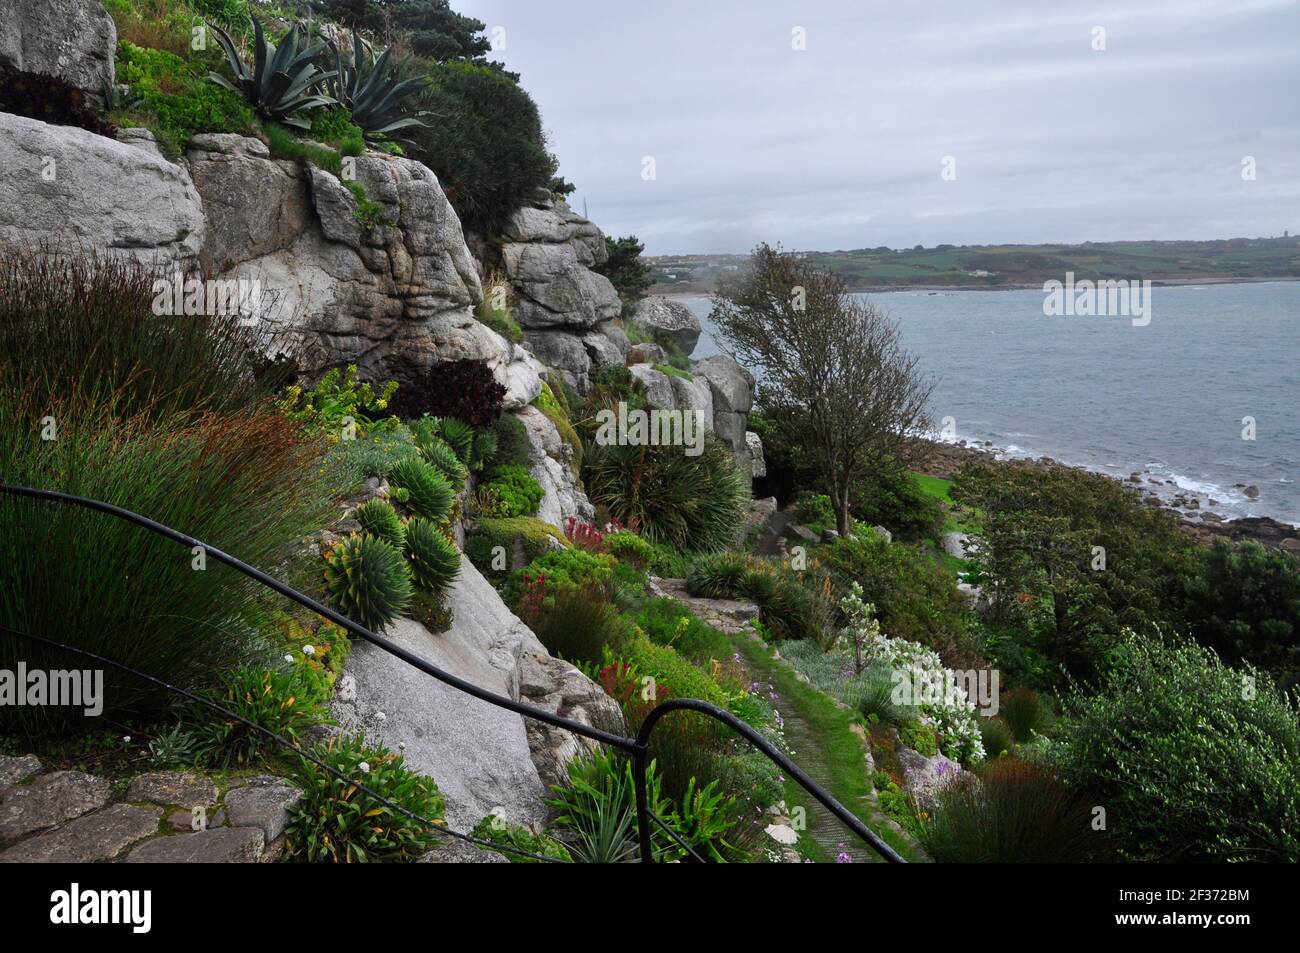 Stone paths wind their way up the steeply terraced rocky gardens full of succulents and sub-tropical plants on the seaward side of St Michaels Mount o Stock Photo